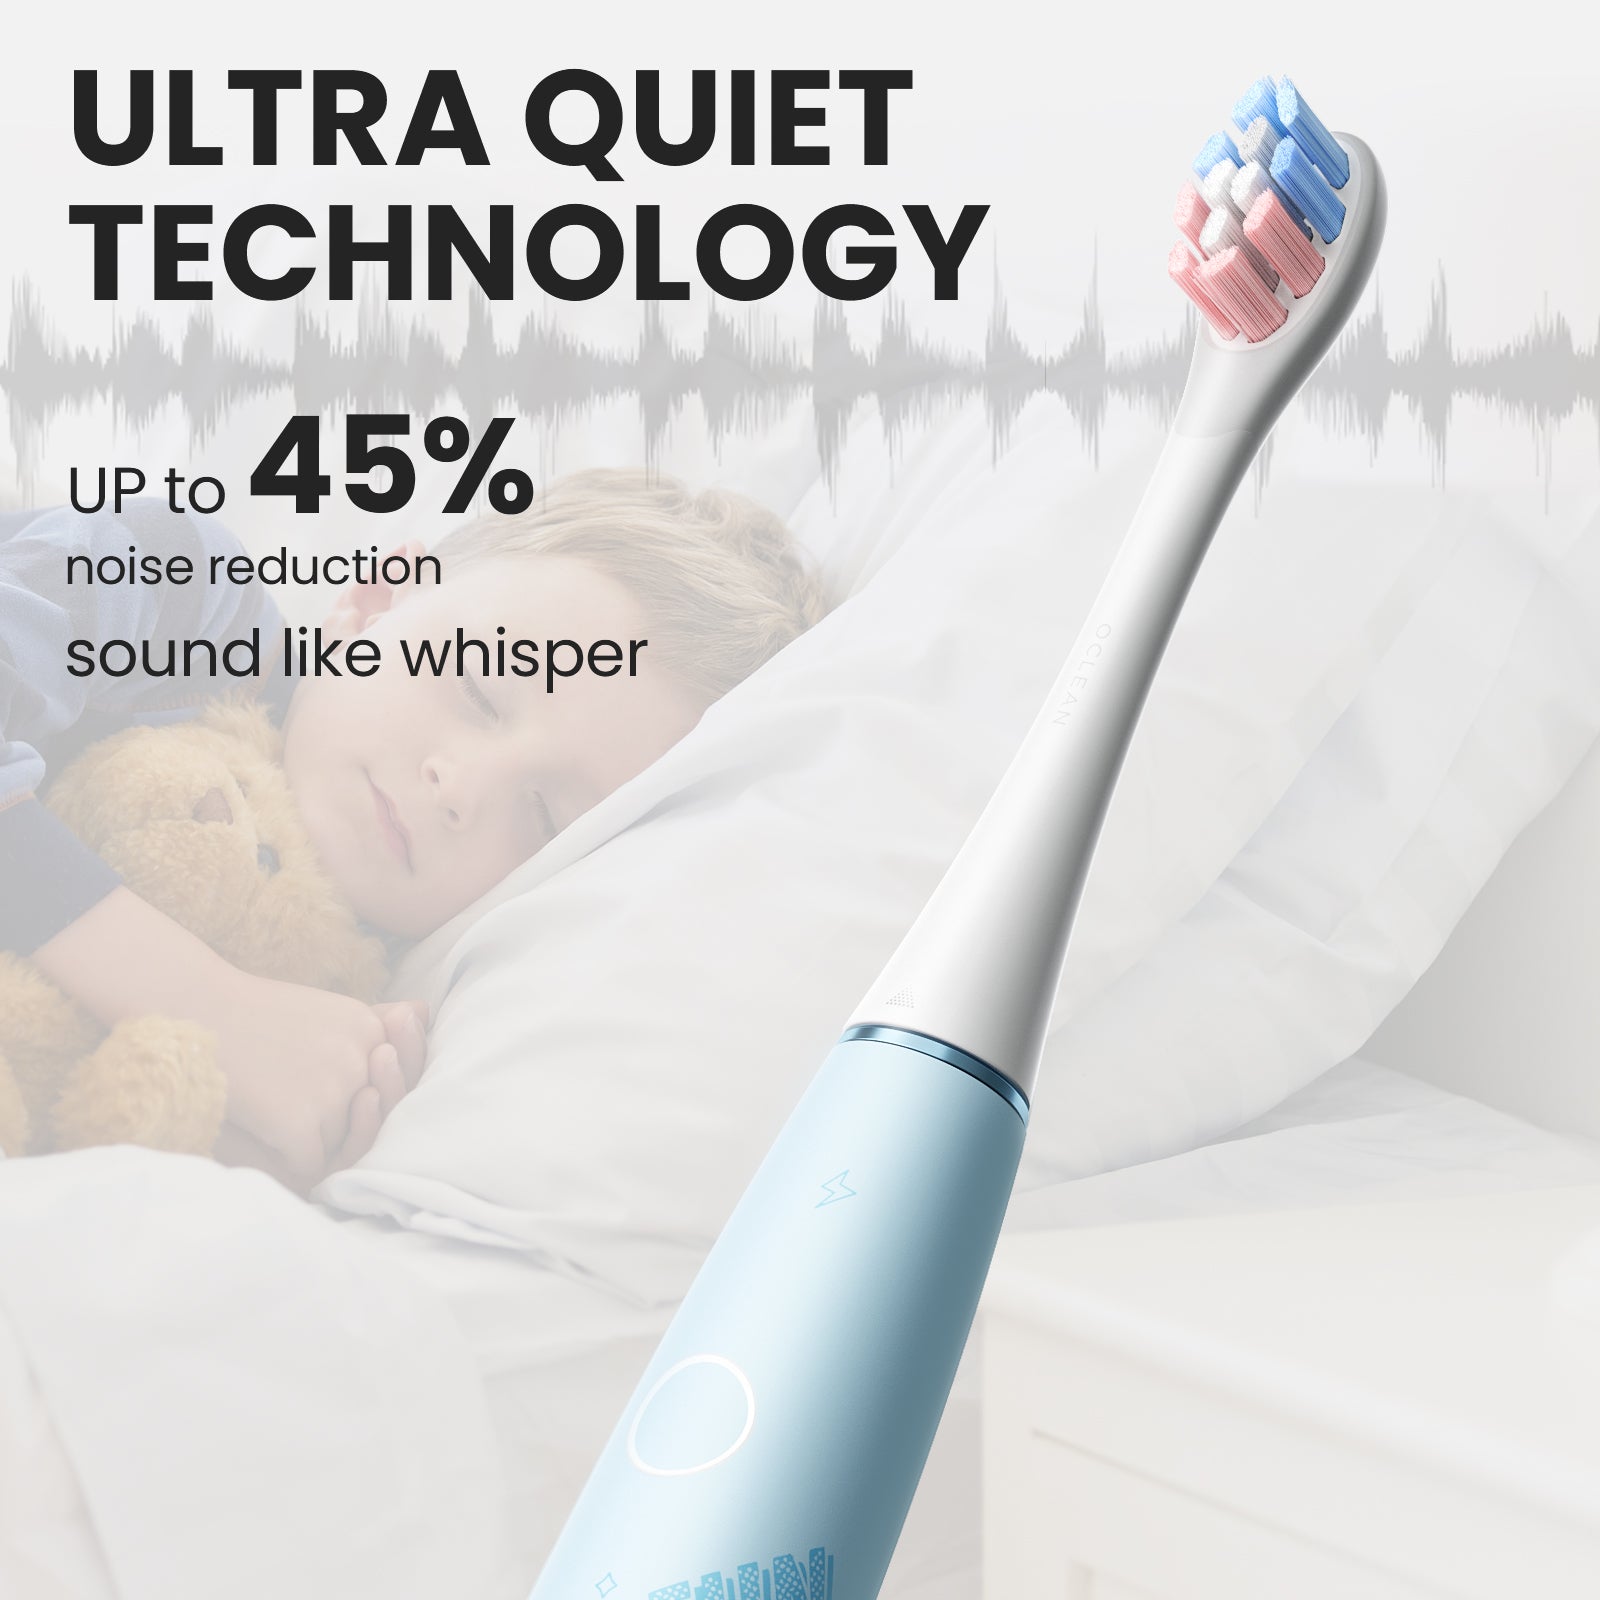 Oclean Kids Electric Toothbrush-Toothbrushes-Oclean US Store